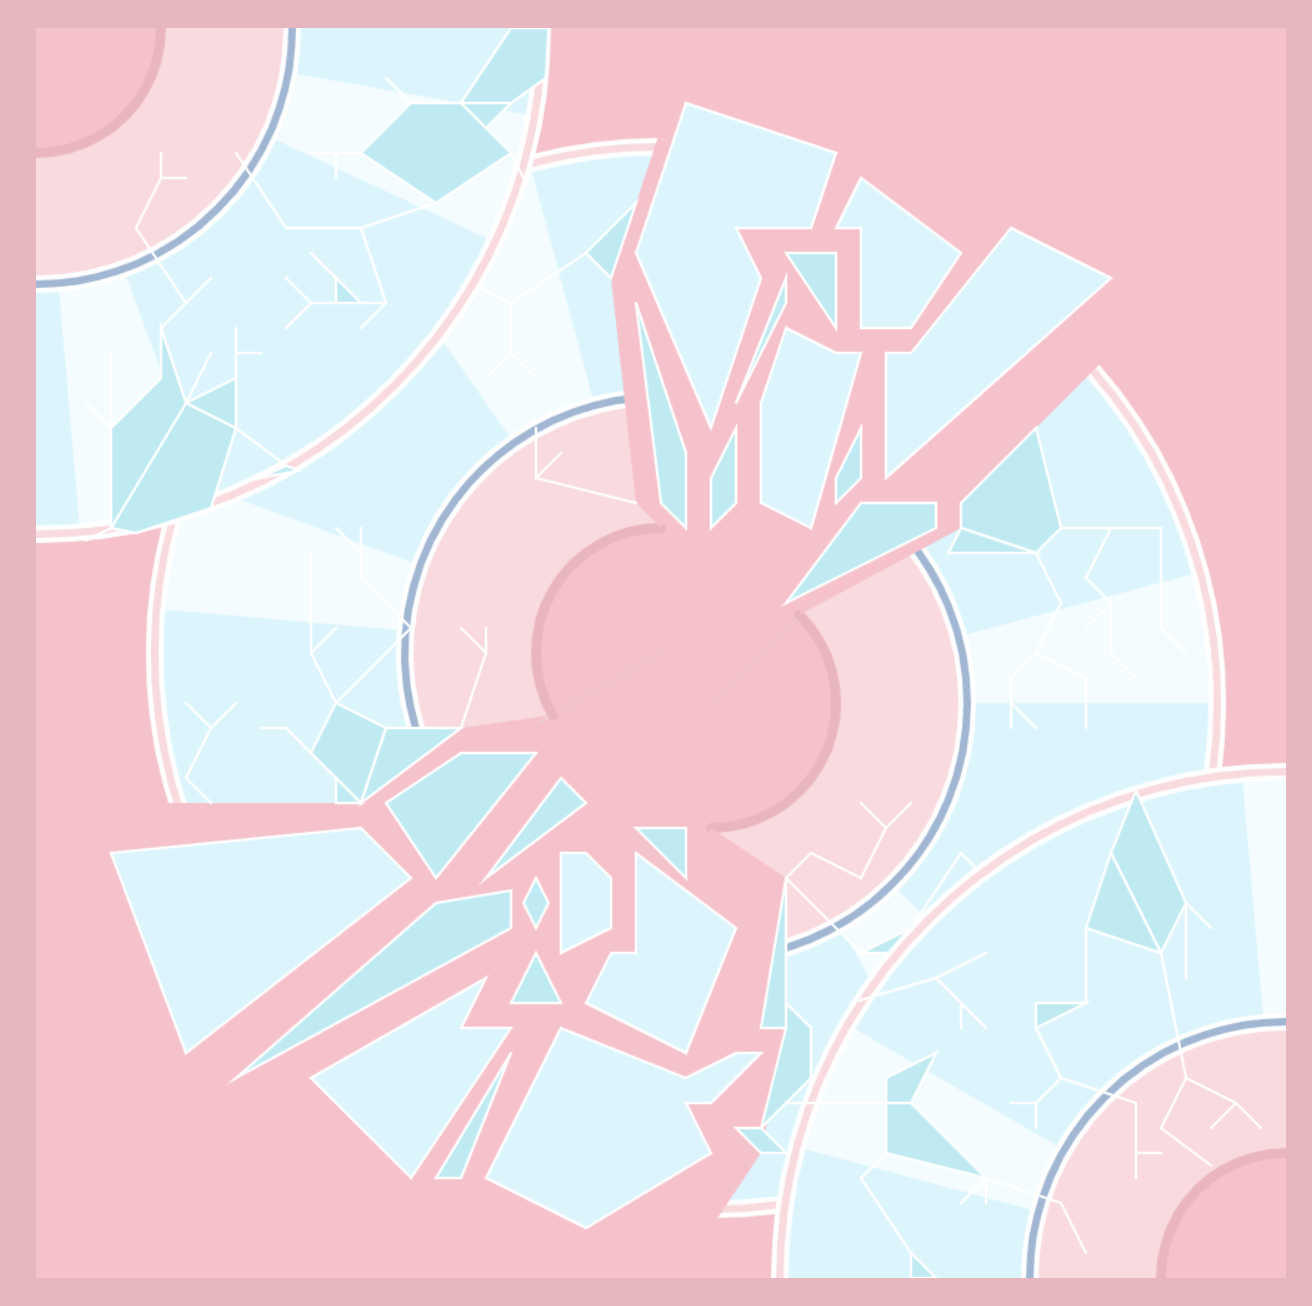 Three light blue CDs that are shattered into pieces on a light pink background.